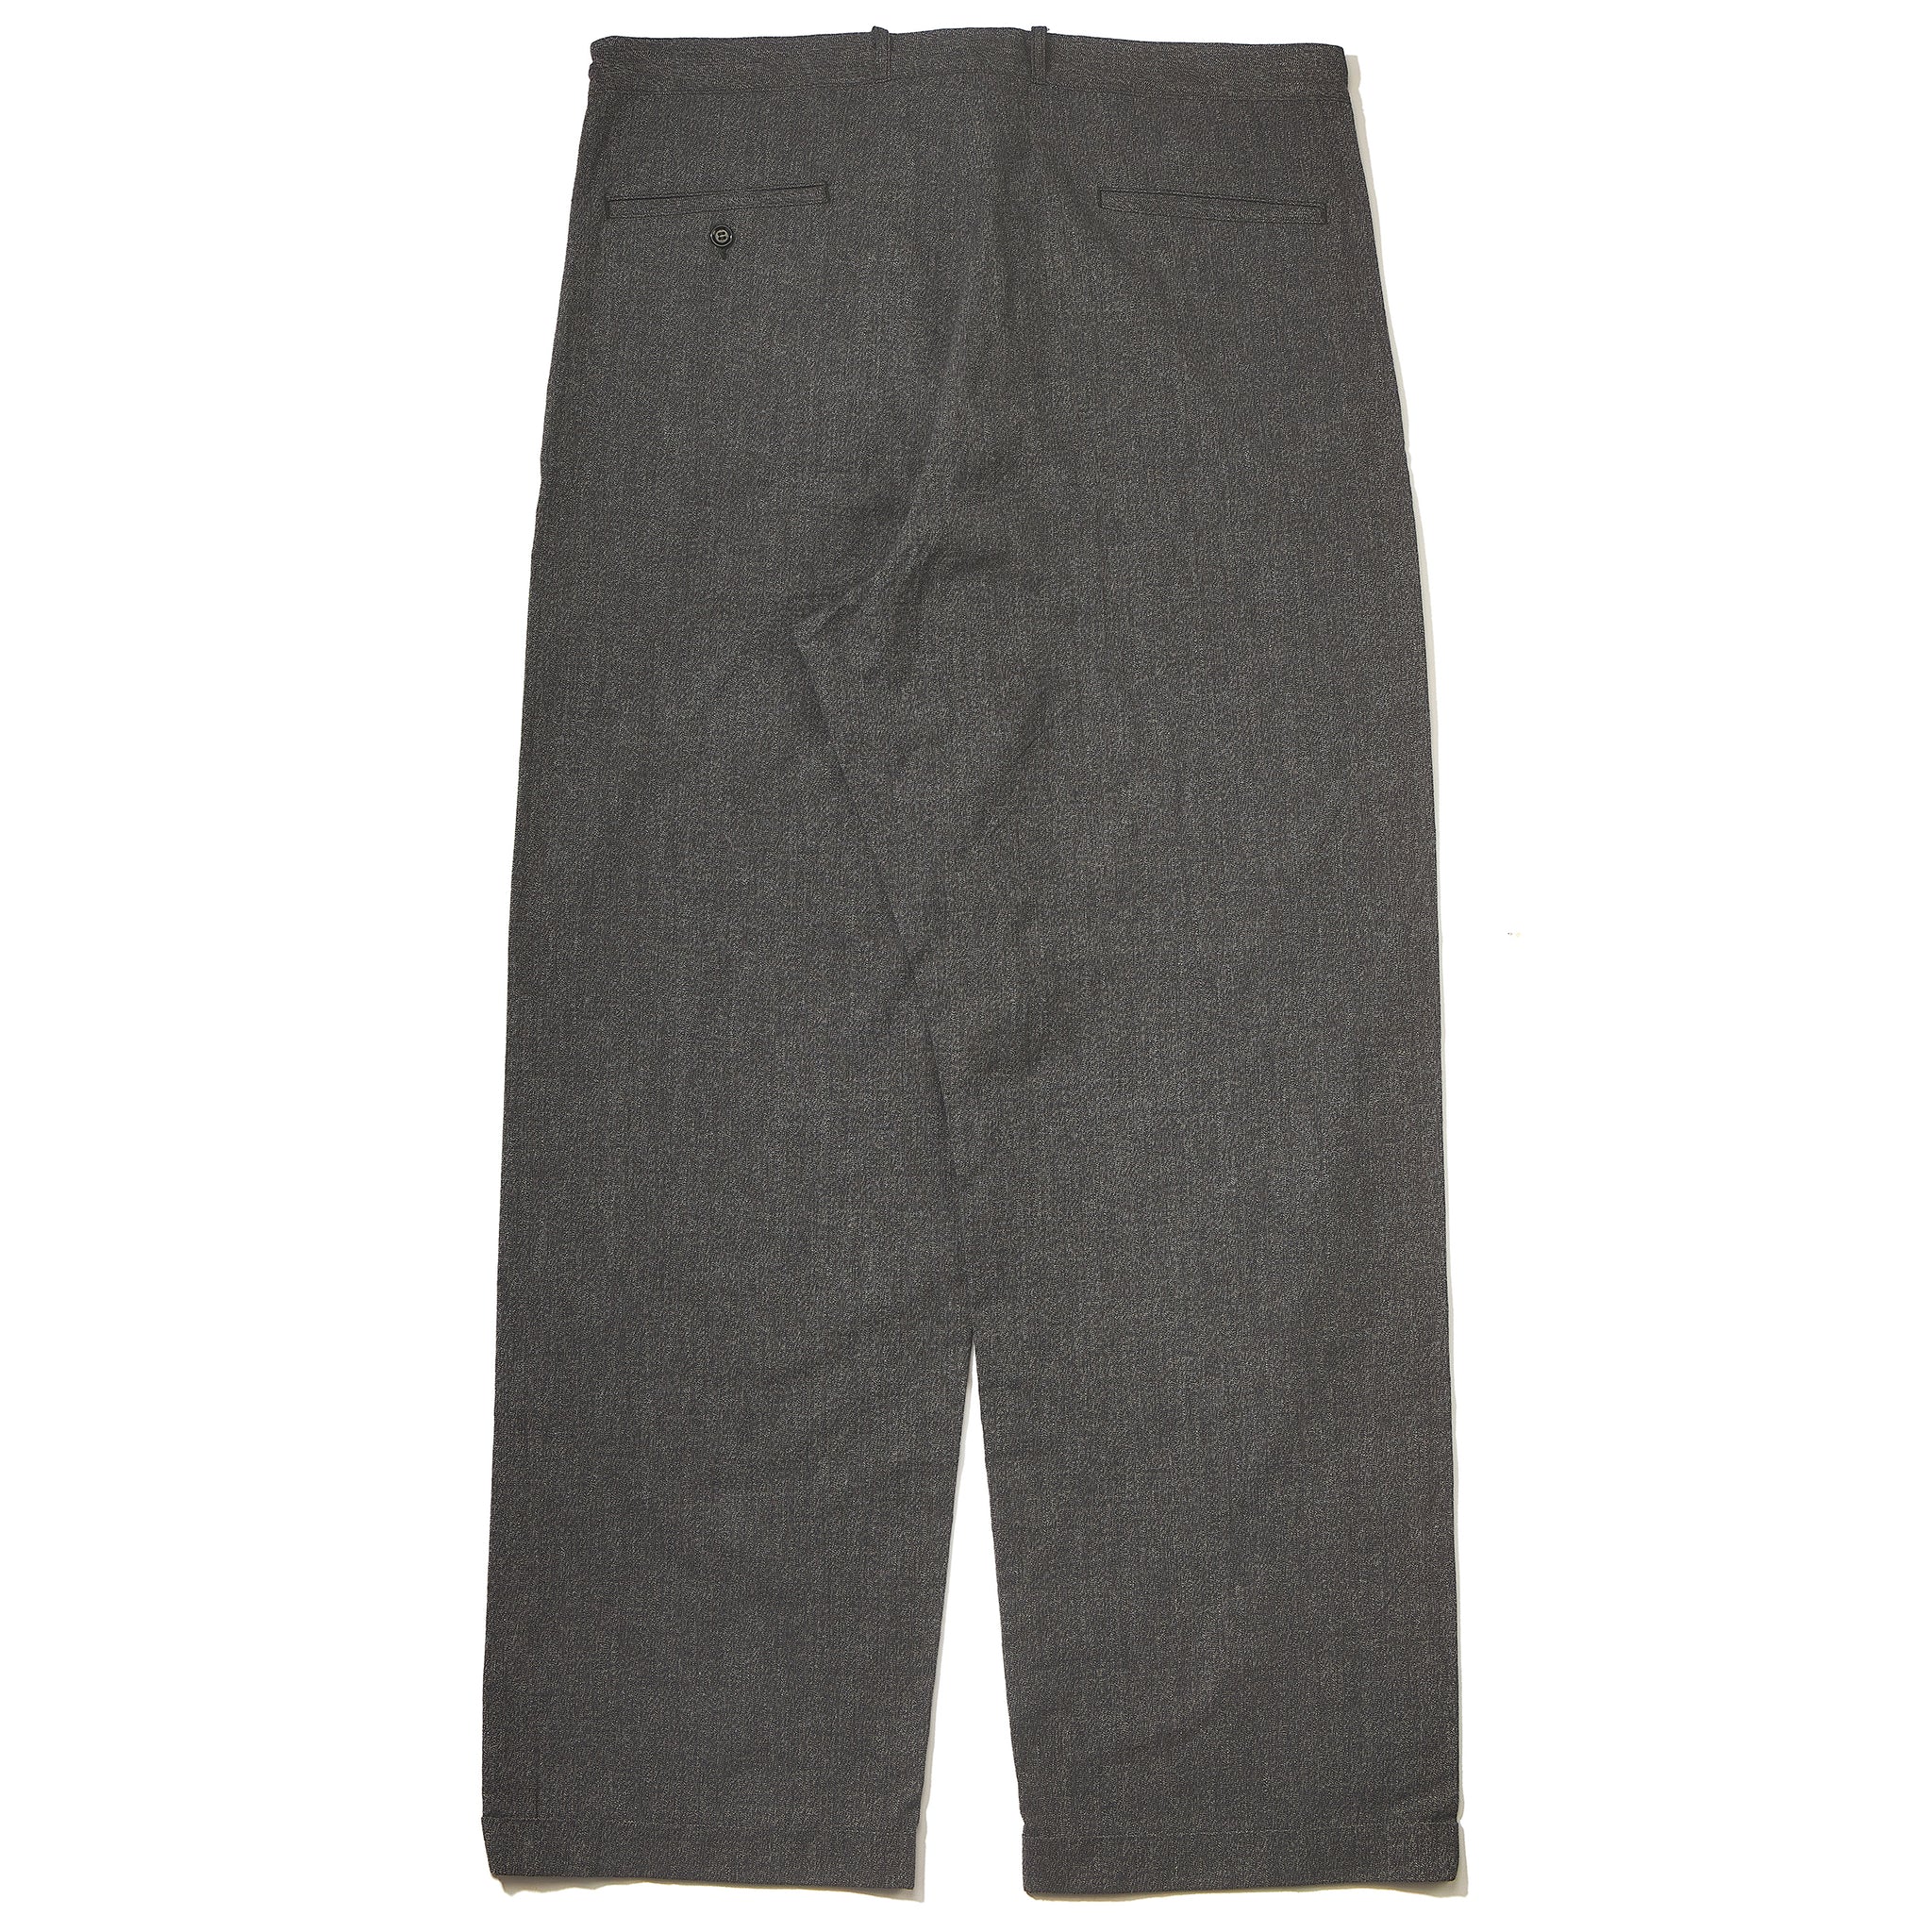 SALT AND PEPPER CHAMBRAY ATELIER TROUSERS